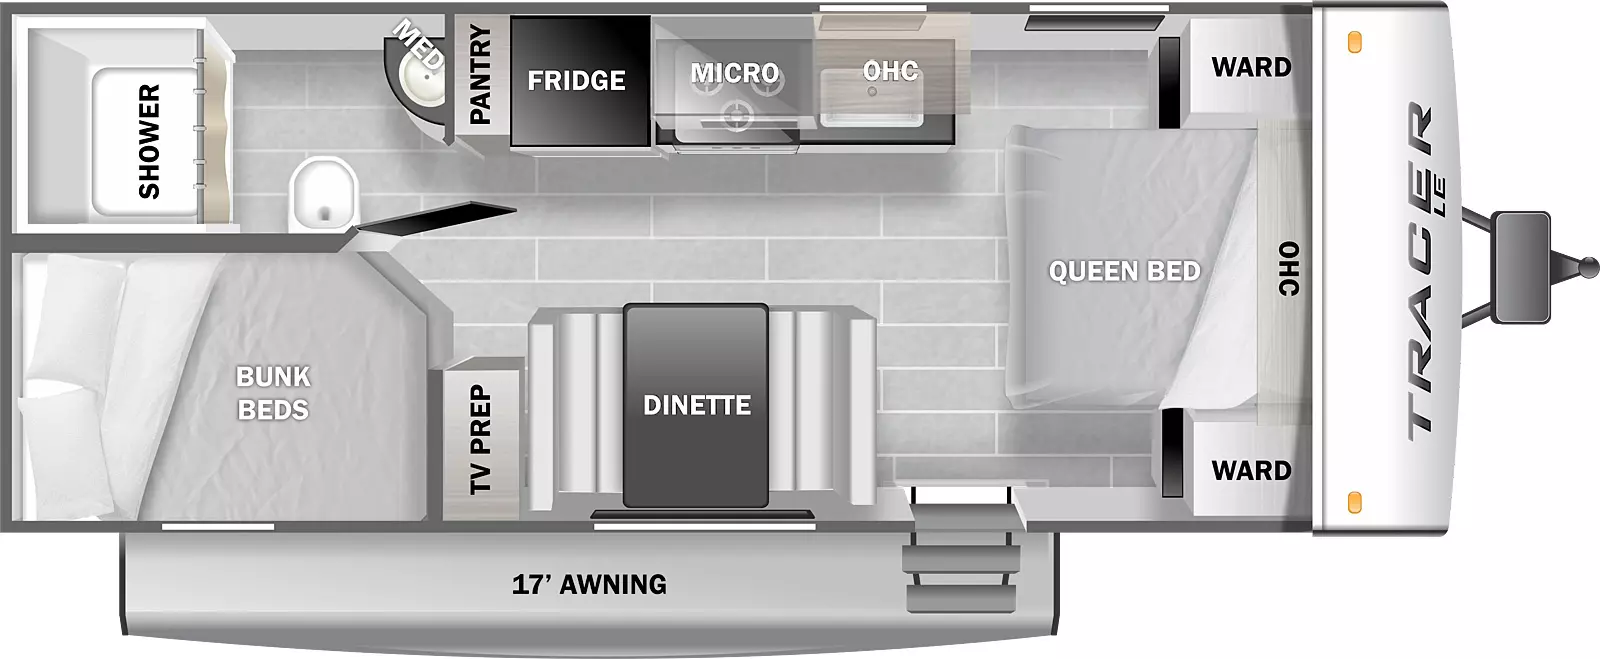 The Tracer LE 200BHSLE floorplan has one entry door and a 17 foot power awning. To the left of the entry door is a booth dinette, left of the dinette is a TV prep area. Bunk beds are in the rear door side corner of the RV. A door leading to the bathroom is in the rear off door corner. The bathroom has a toilet, shower, and sink with a medicine cabinet above. The off door side of the RV has a pantry a refrigerator, and a counter top. The counter top has a stove and a sink. A microwave is above the stove and overhead storage is above the sink. A queen bed is in the front of the RV. A wardrobe and night stand are on the left and right sides of the bed and overhead storage is above it.